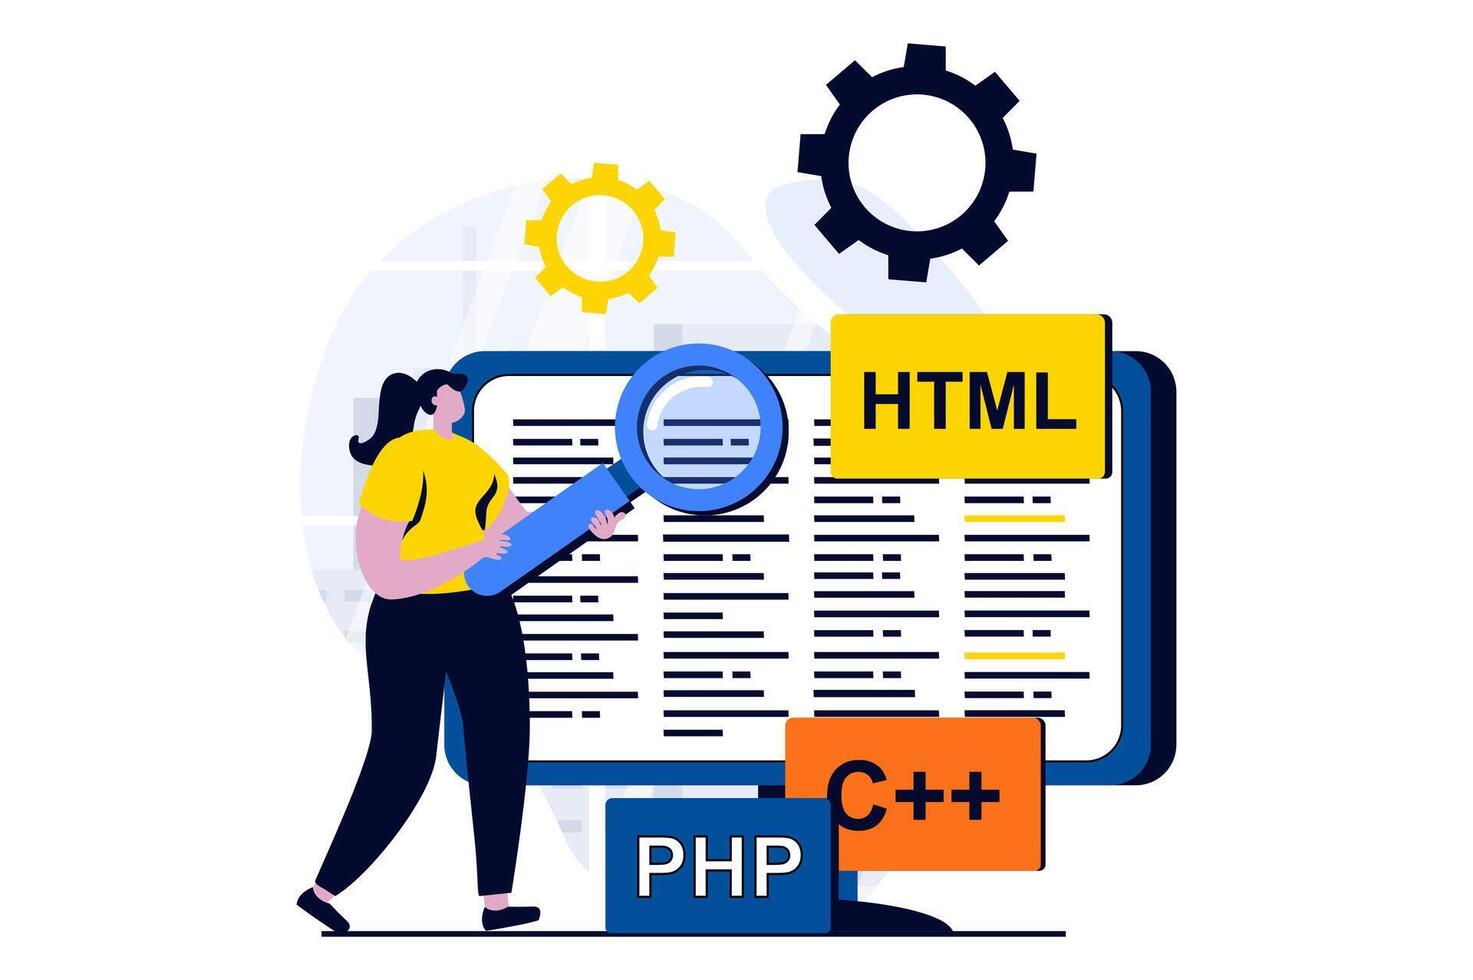 Software development concept with people scene in flat cartoon design. Woman developer working with programming language, searching problems and fixing code. illustration visual story for web vector